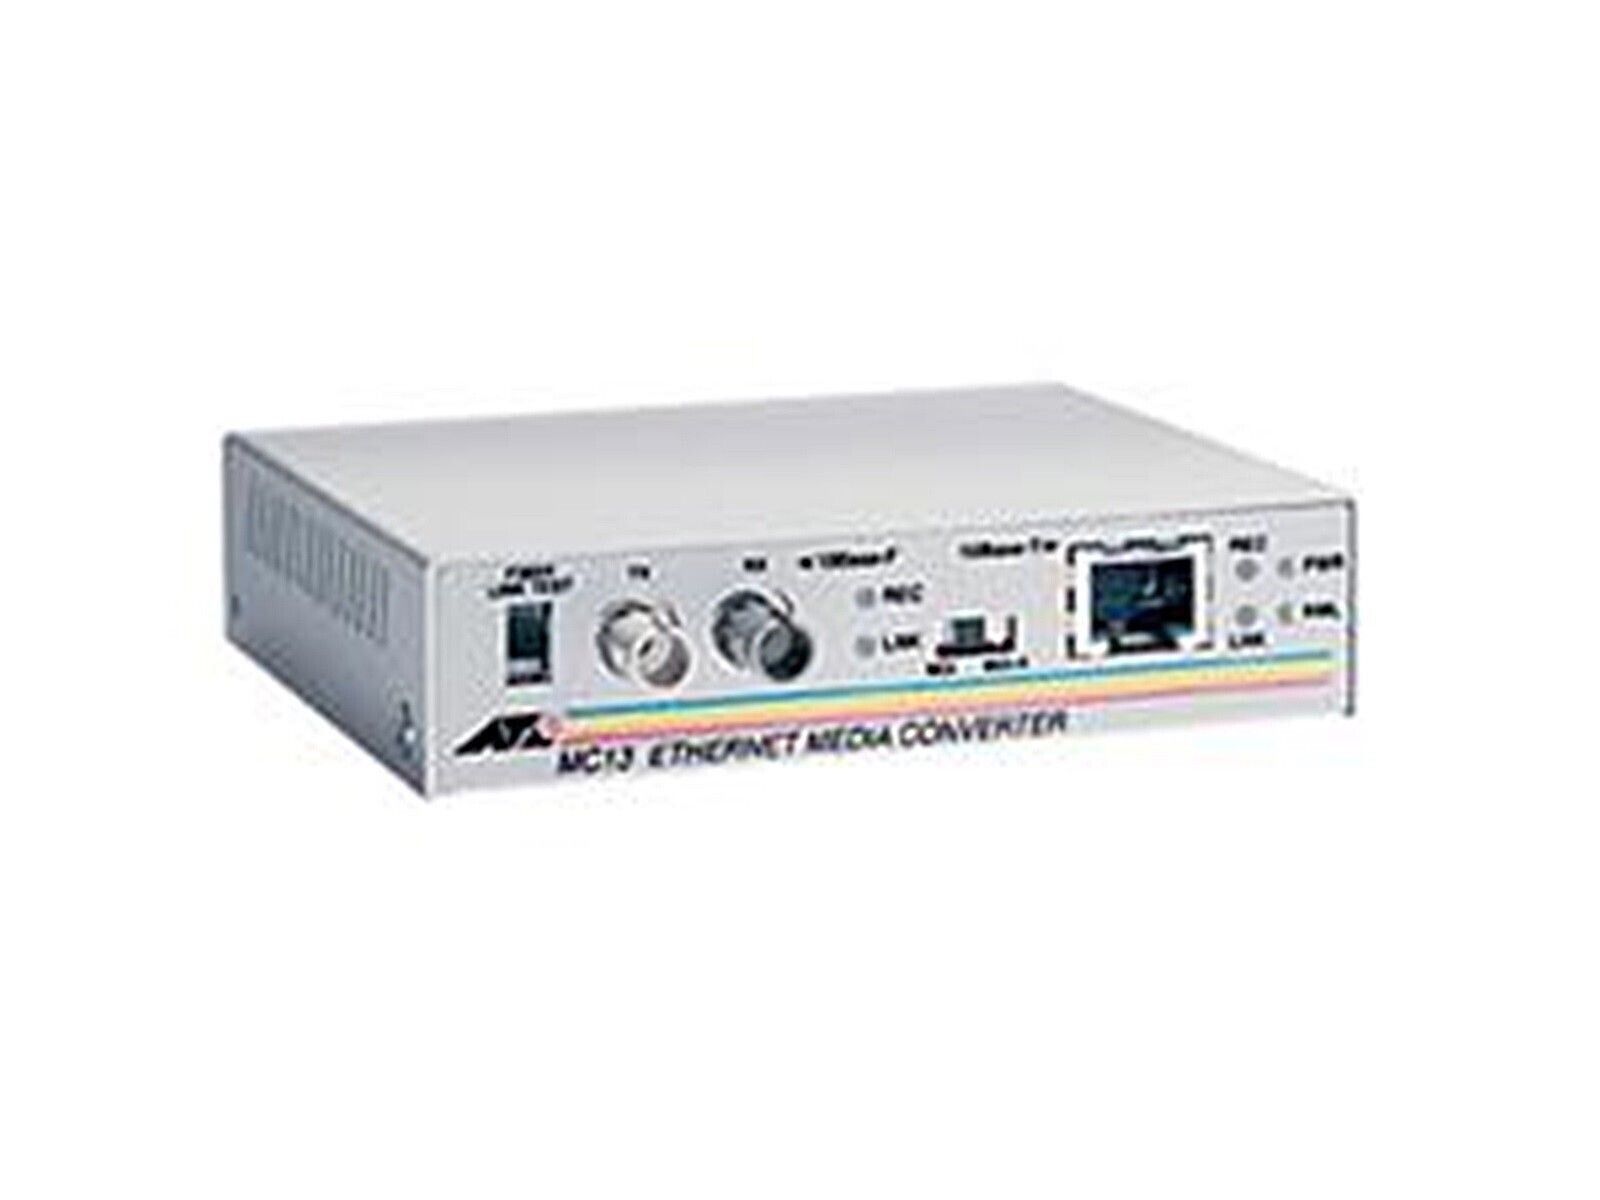 ALLIED TELESYN - MC13 Ethernet Media Converter Model AT-MT13 Used with Power